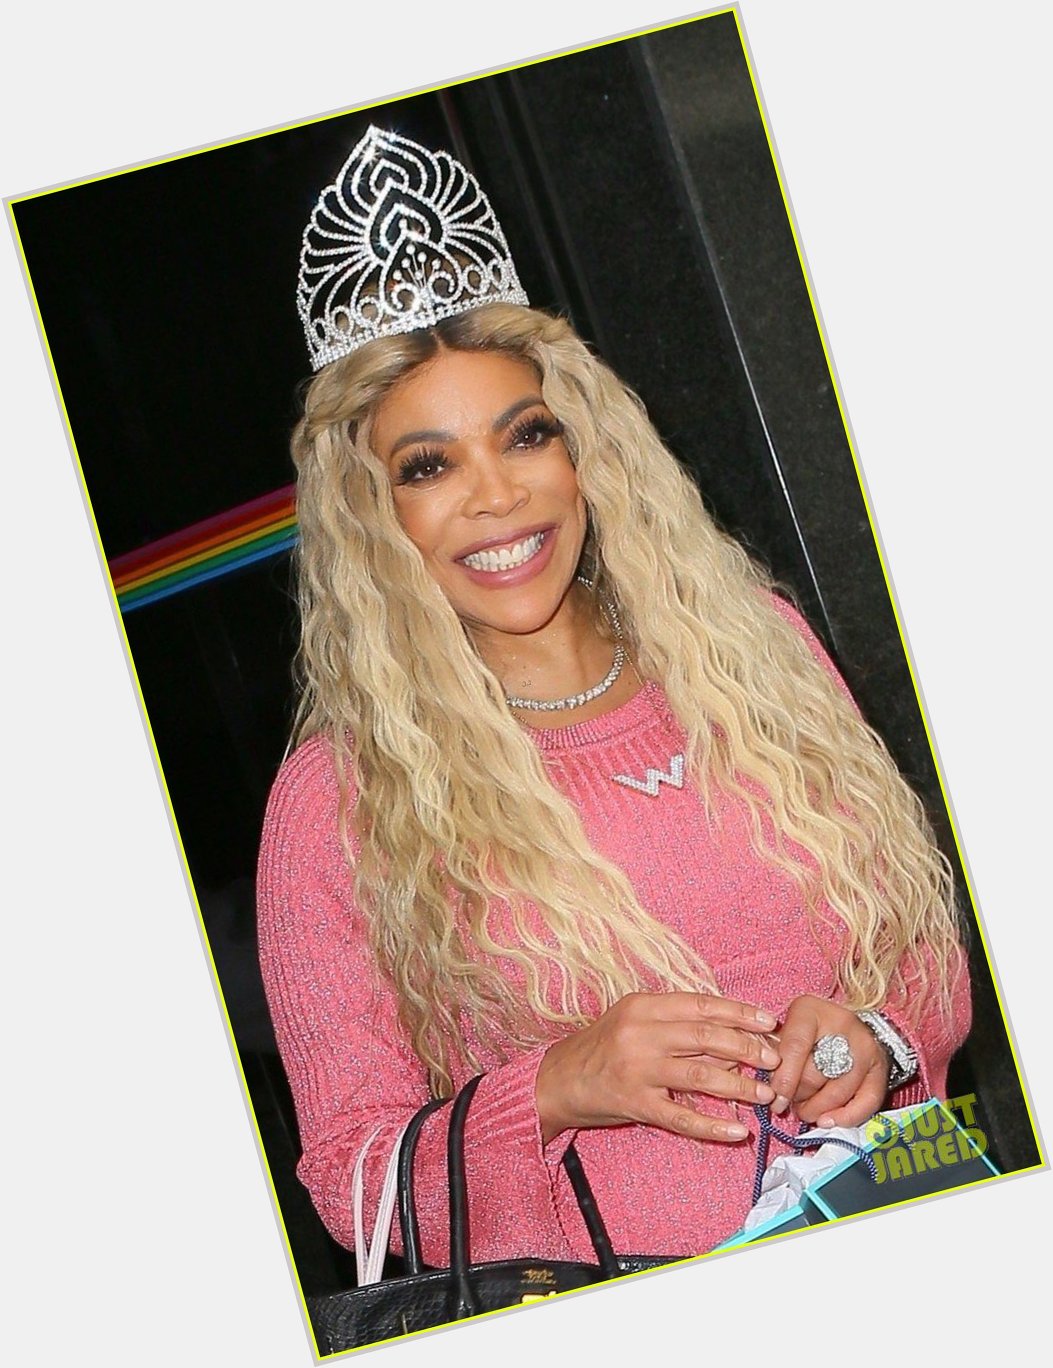 Good morning (and happy birthday) to wendy williams and her giant tiara only 